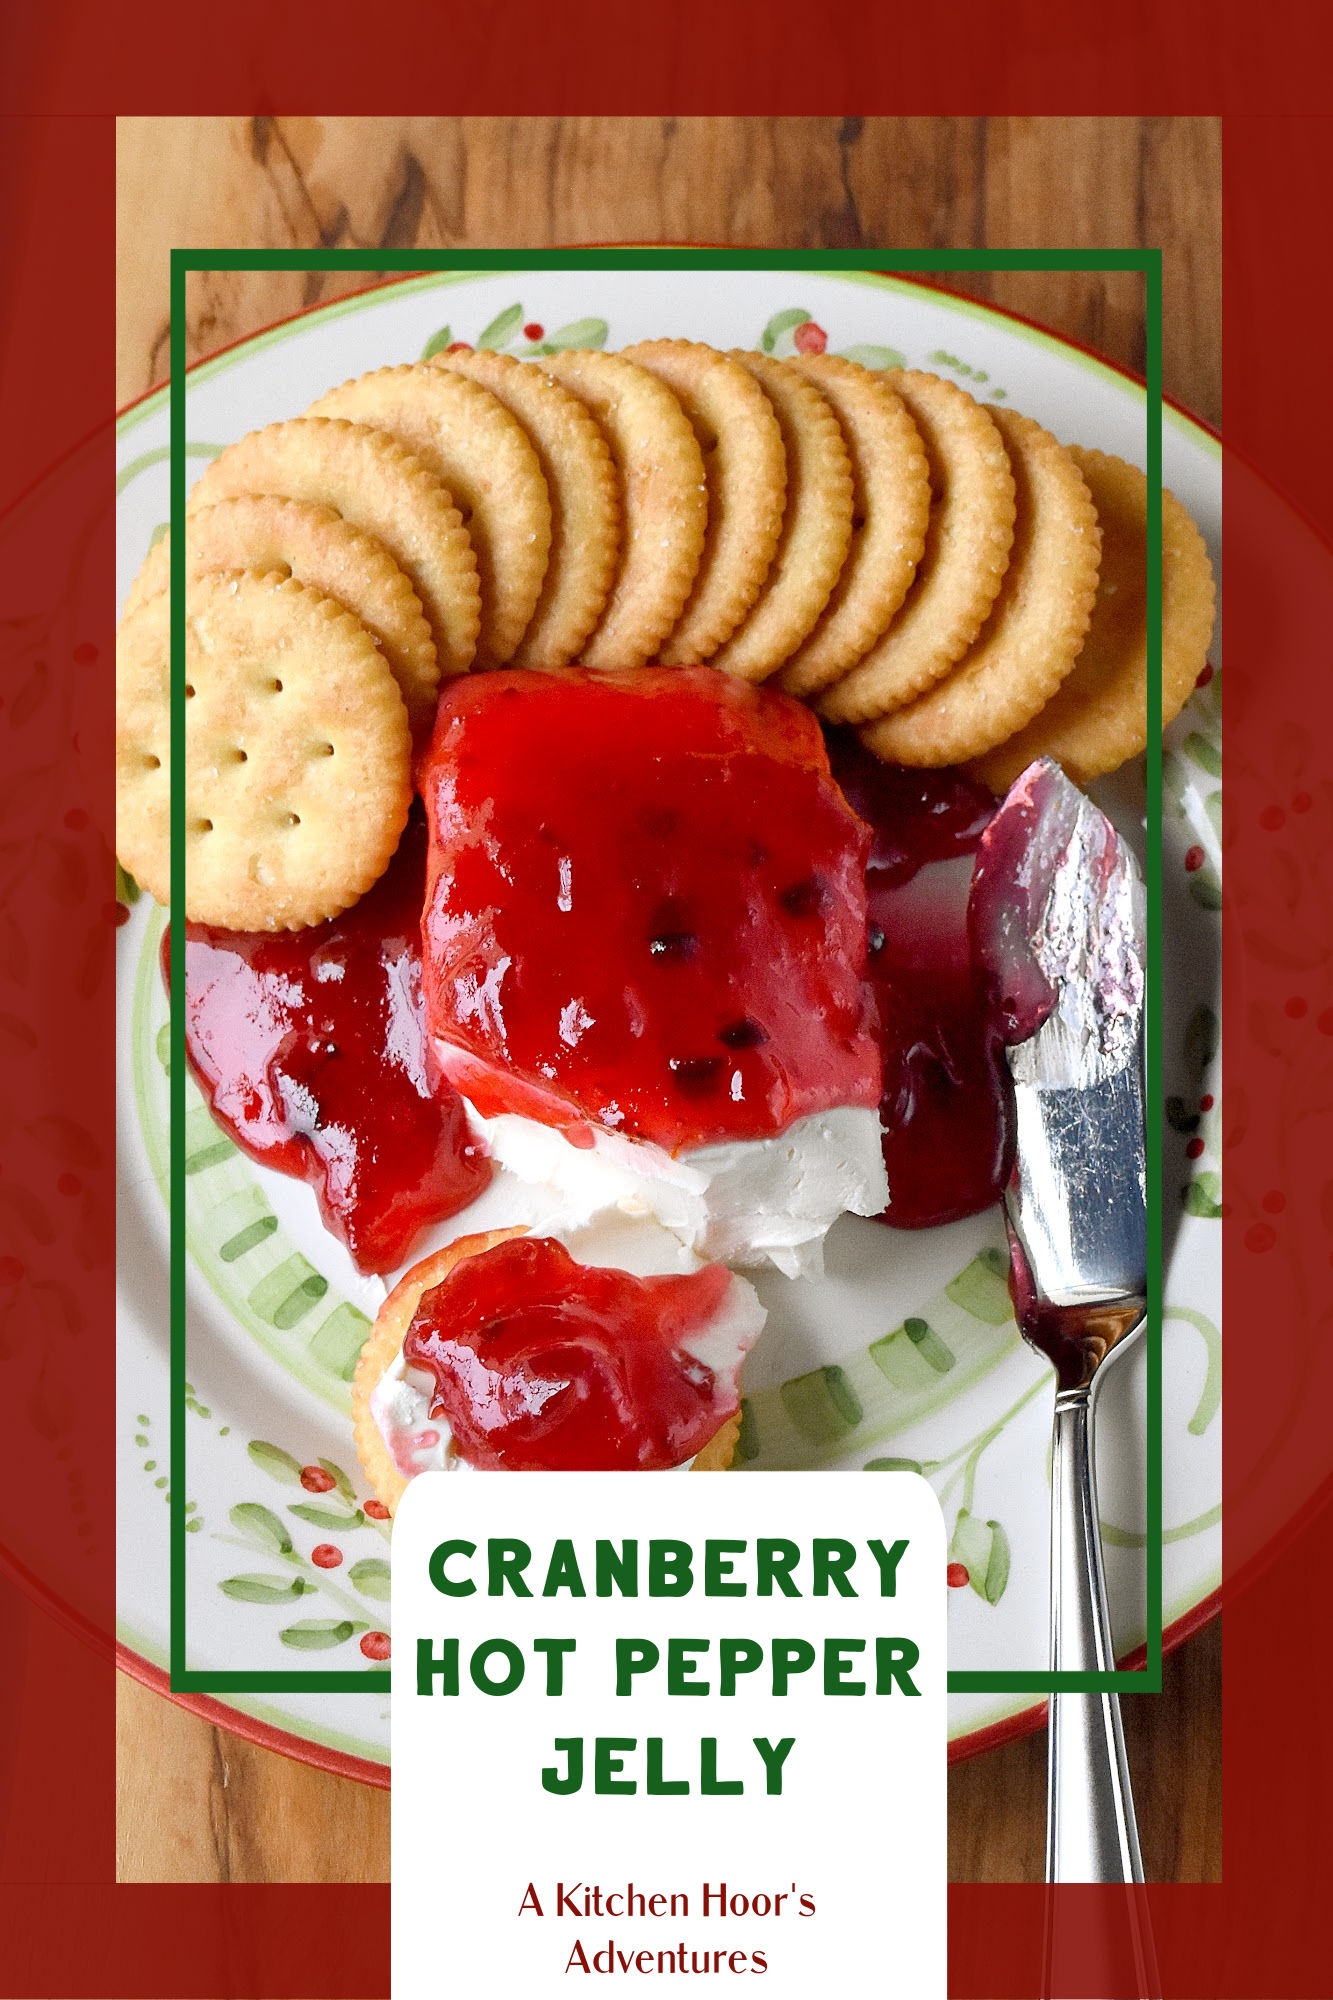 Make your Holidays Zesty with Cranberry Hot Pepper Jelly